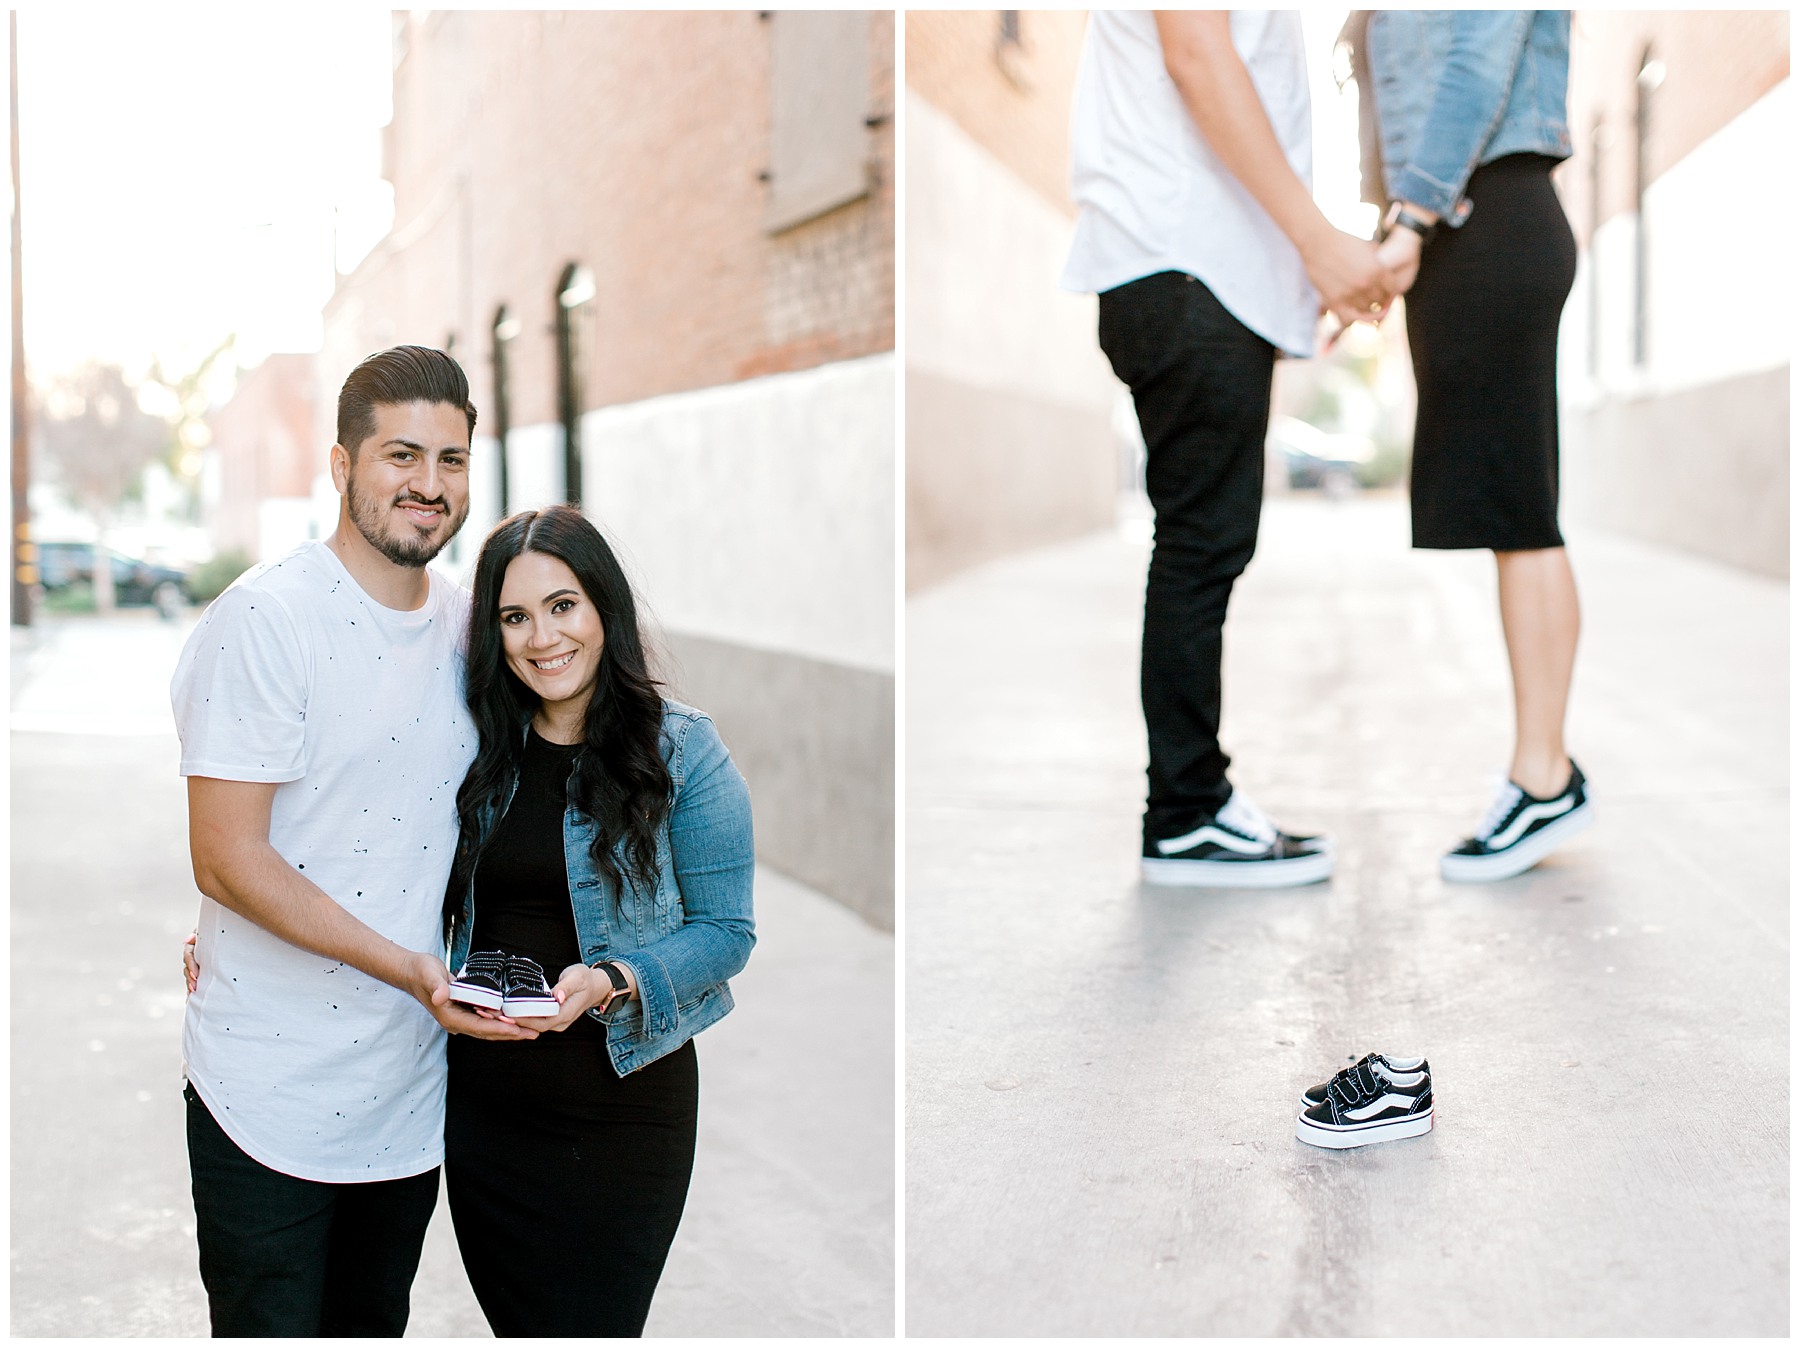 Old Towne Orange Family Photography Pregnancy Announcement